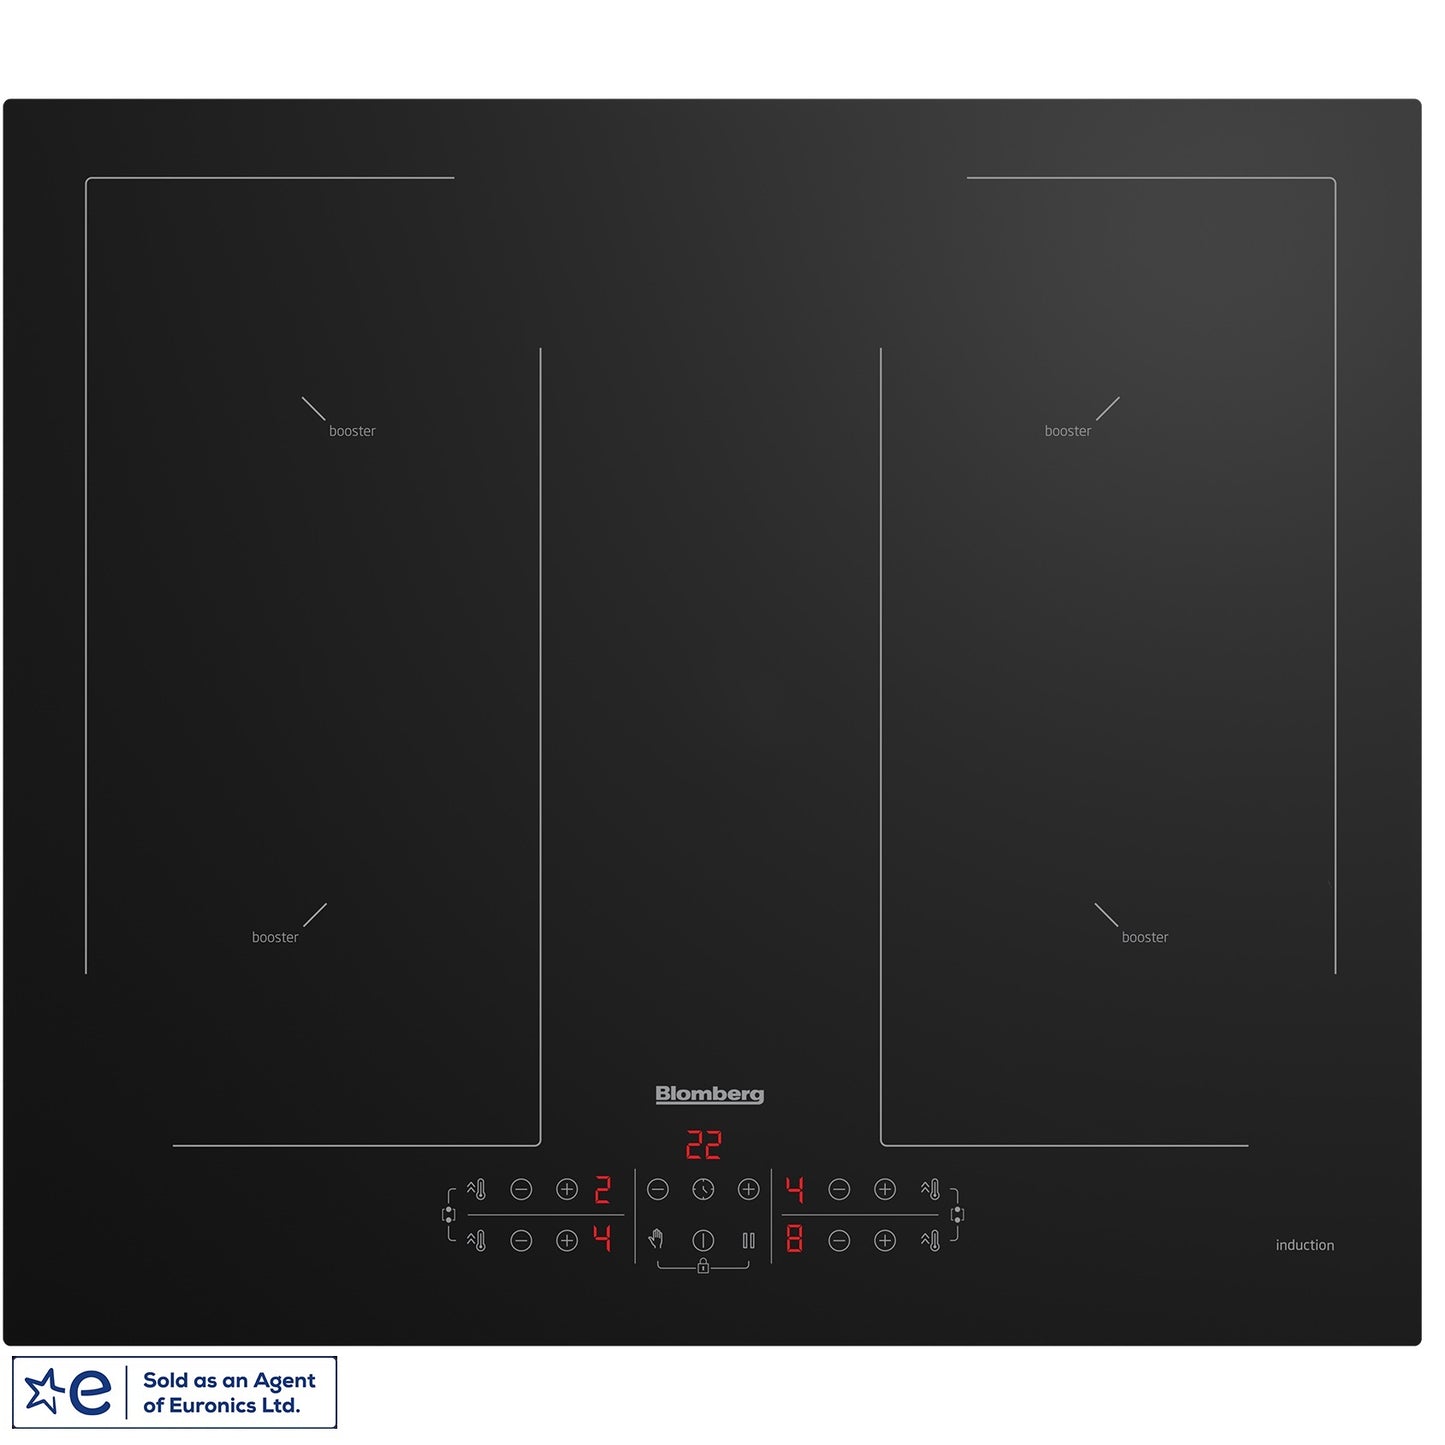 Blomberg MIN54483N Built- in Hard Wired Electric Induction Hob With Flexi-Zone